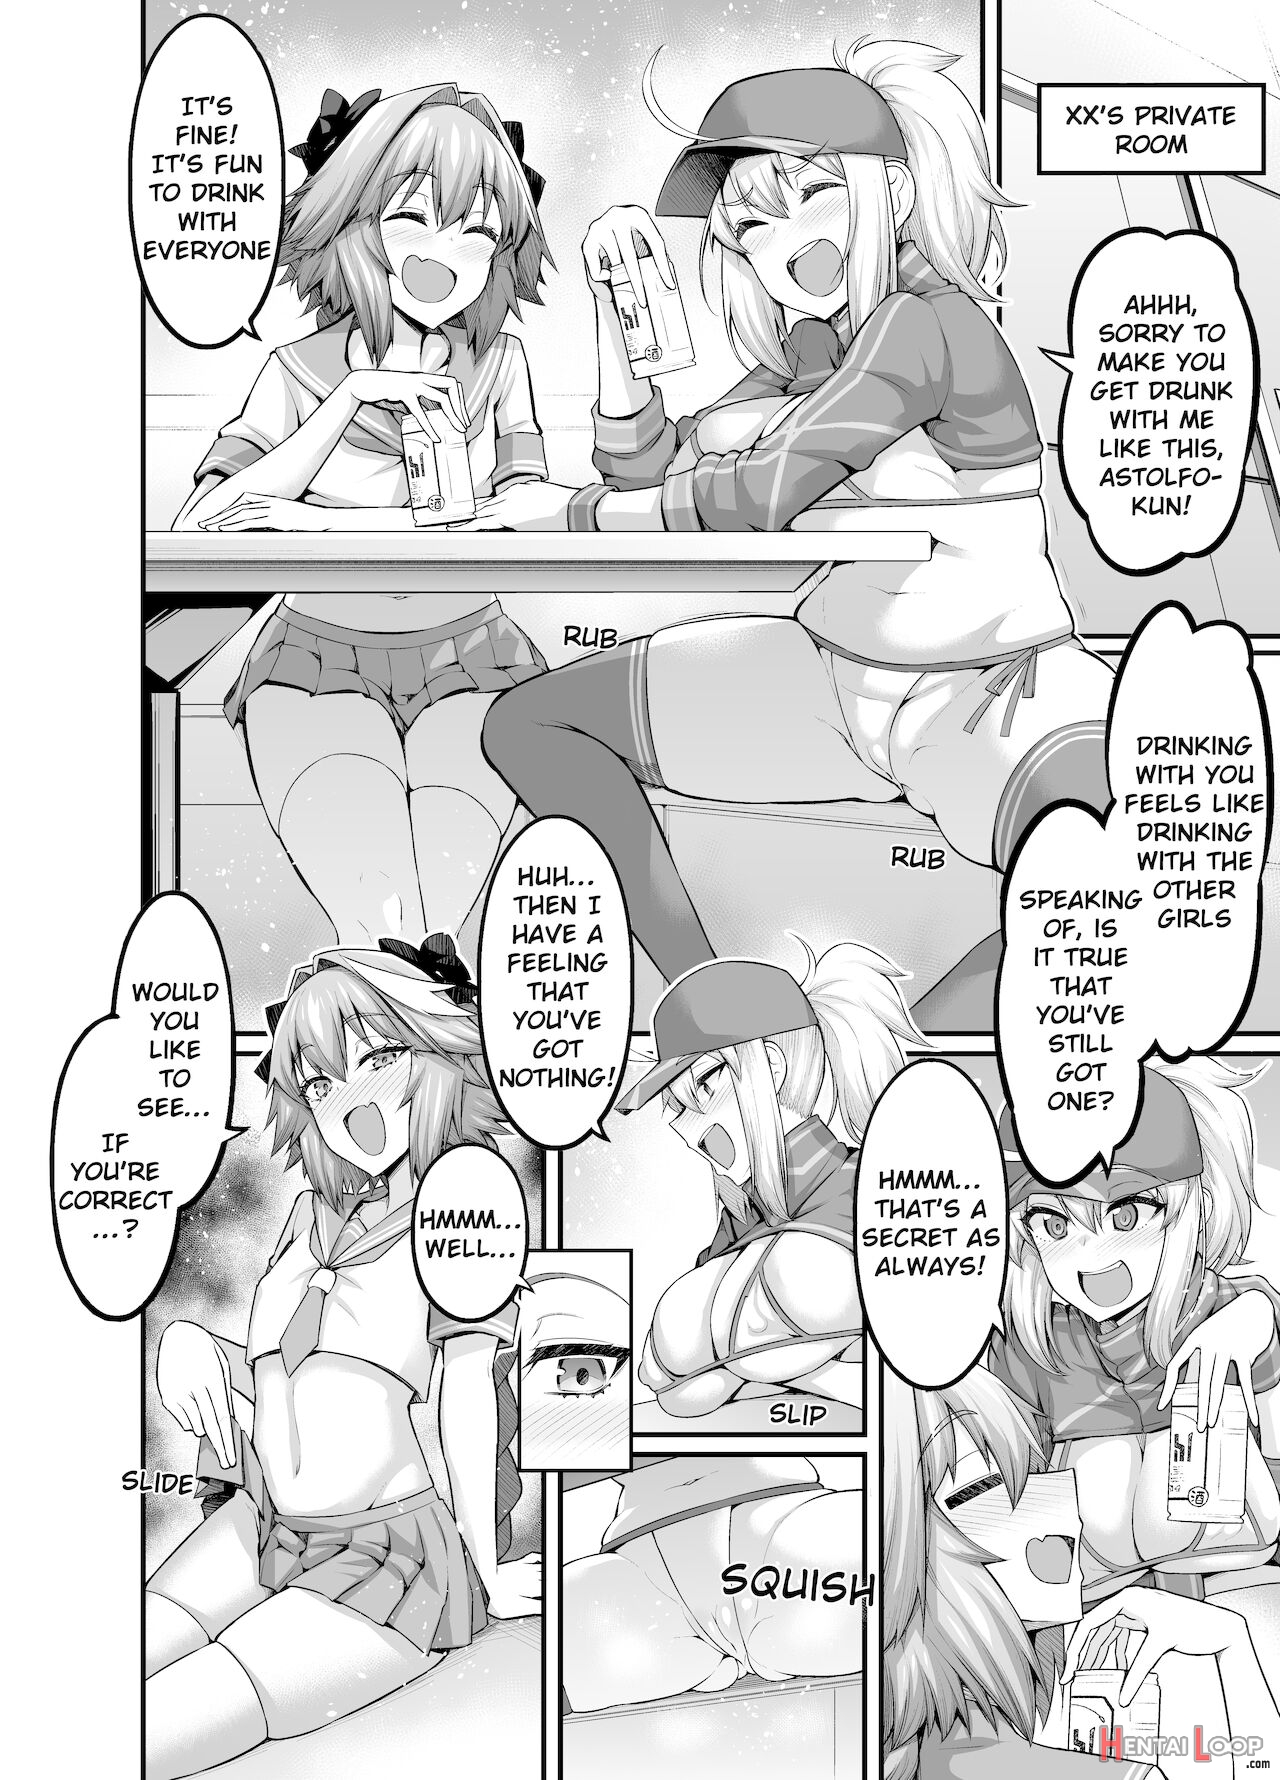 Big Sister Xx And Astolfo Learn To Get Along page 2